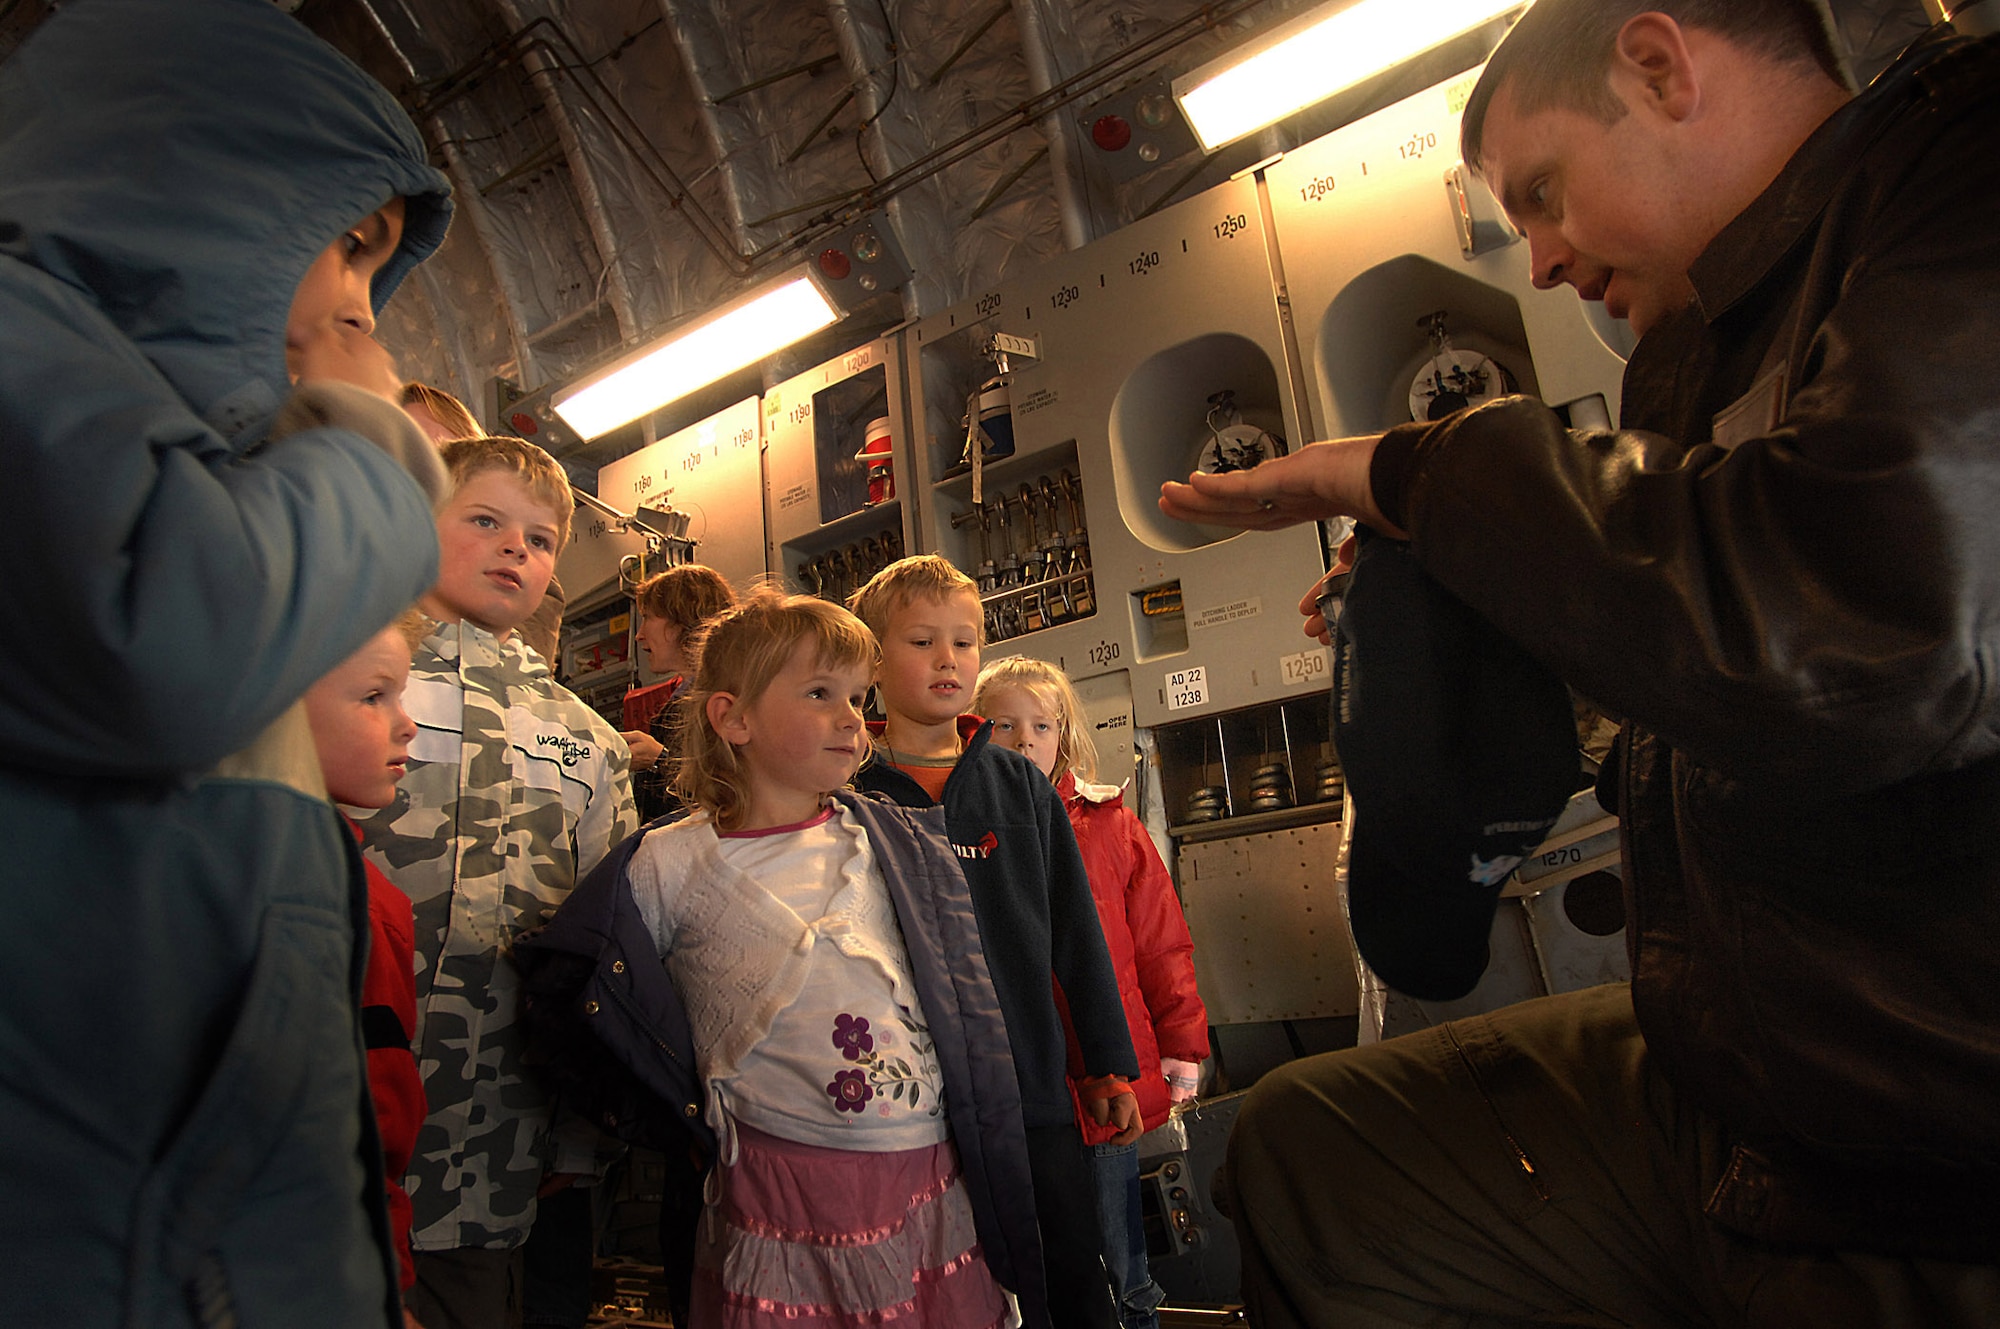 Capt. Corey Simmons, a pilot from the 62nd Airlift Wing, McChord Air Force Base, Wash., explains features of the C-17 Globemaster III to a group on New Zealand children.  The C-17, flown by a total force aircrew of Reserve and active-duty Airmen from the 446th and 62nd Airlift Wings at McChord, is staging out of Christchurch for Operation Deep freeze in Antarctica. (U.S. Air Force photo/Staff Sgt. Aaron Allmon)